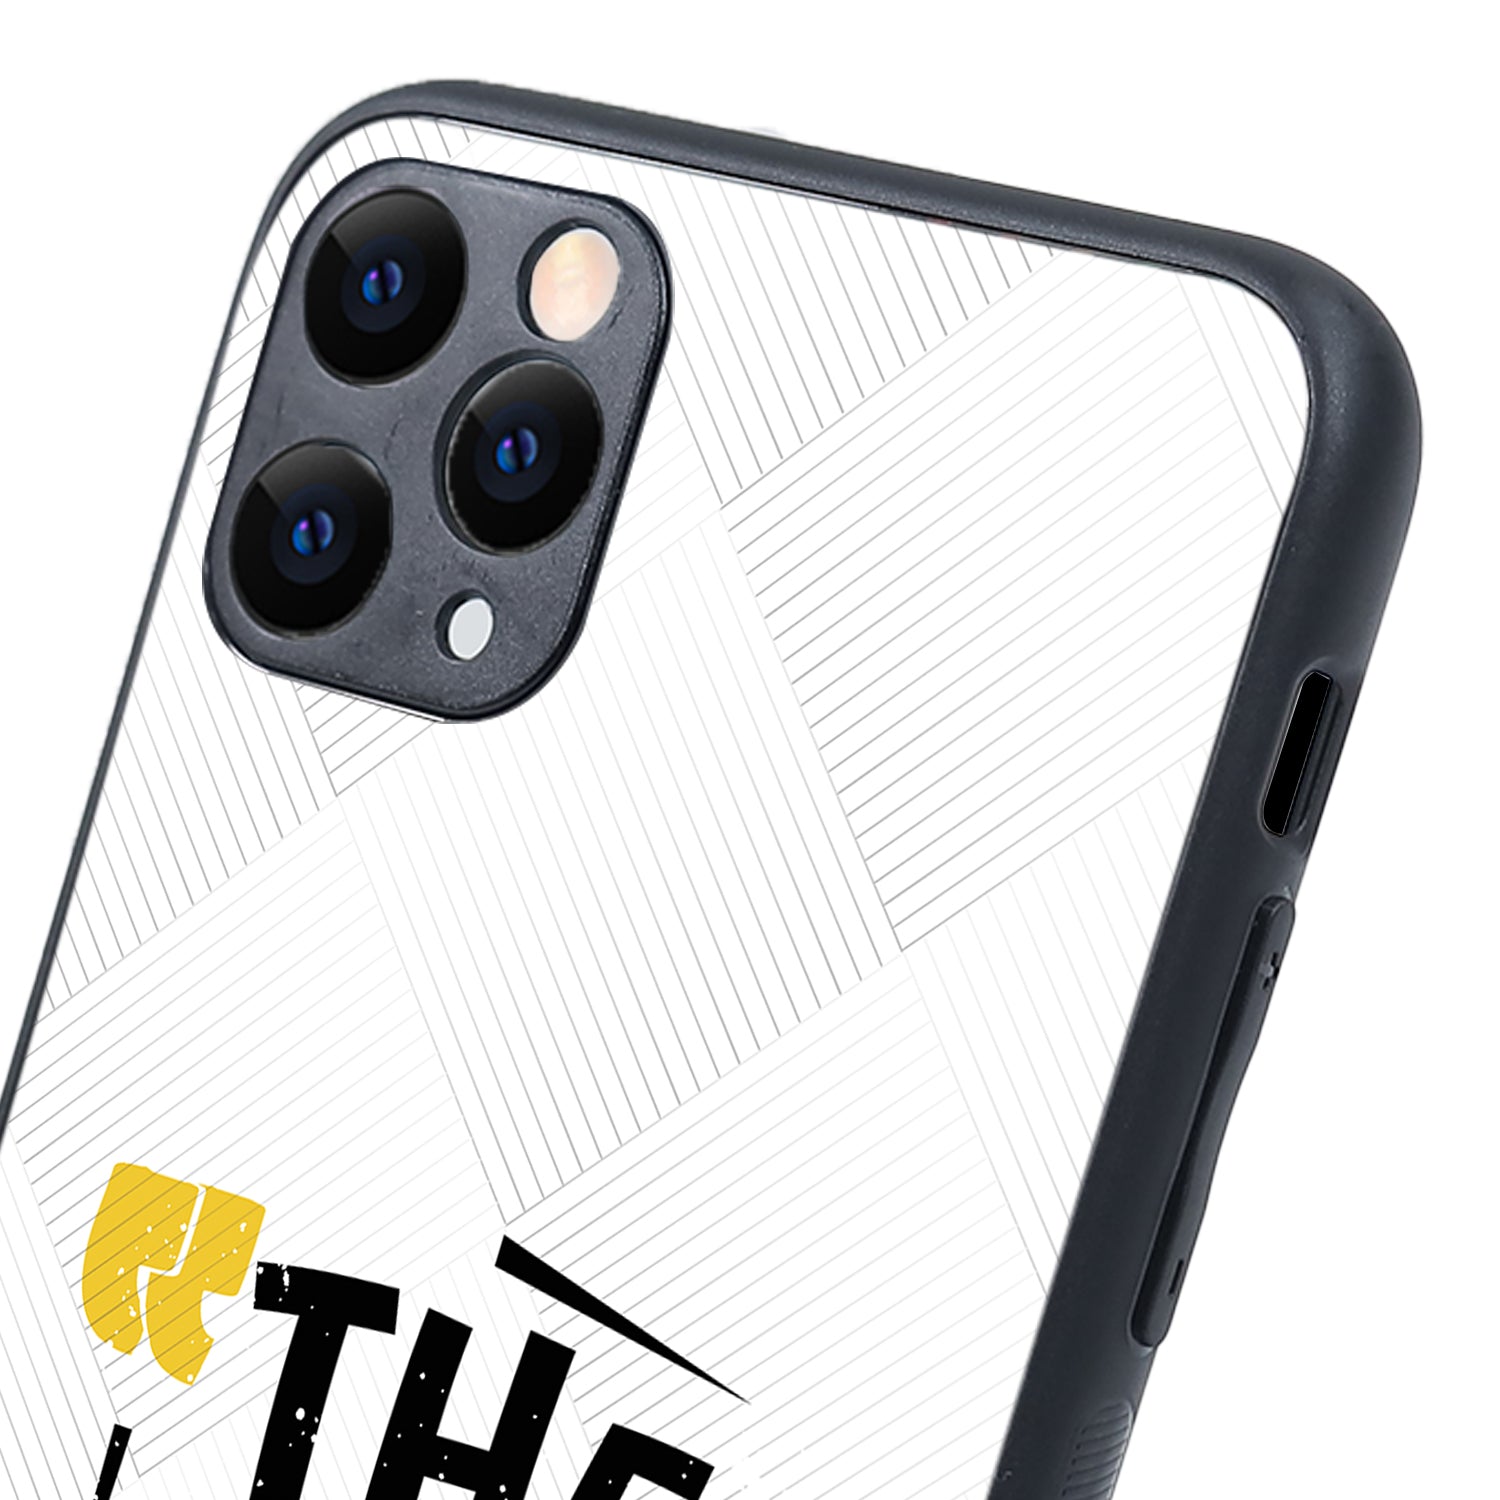 The More You Earn Quote iPhone 11 Pro Max Case